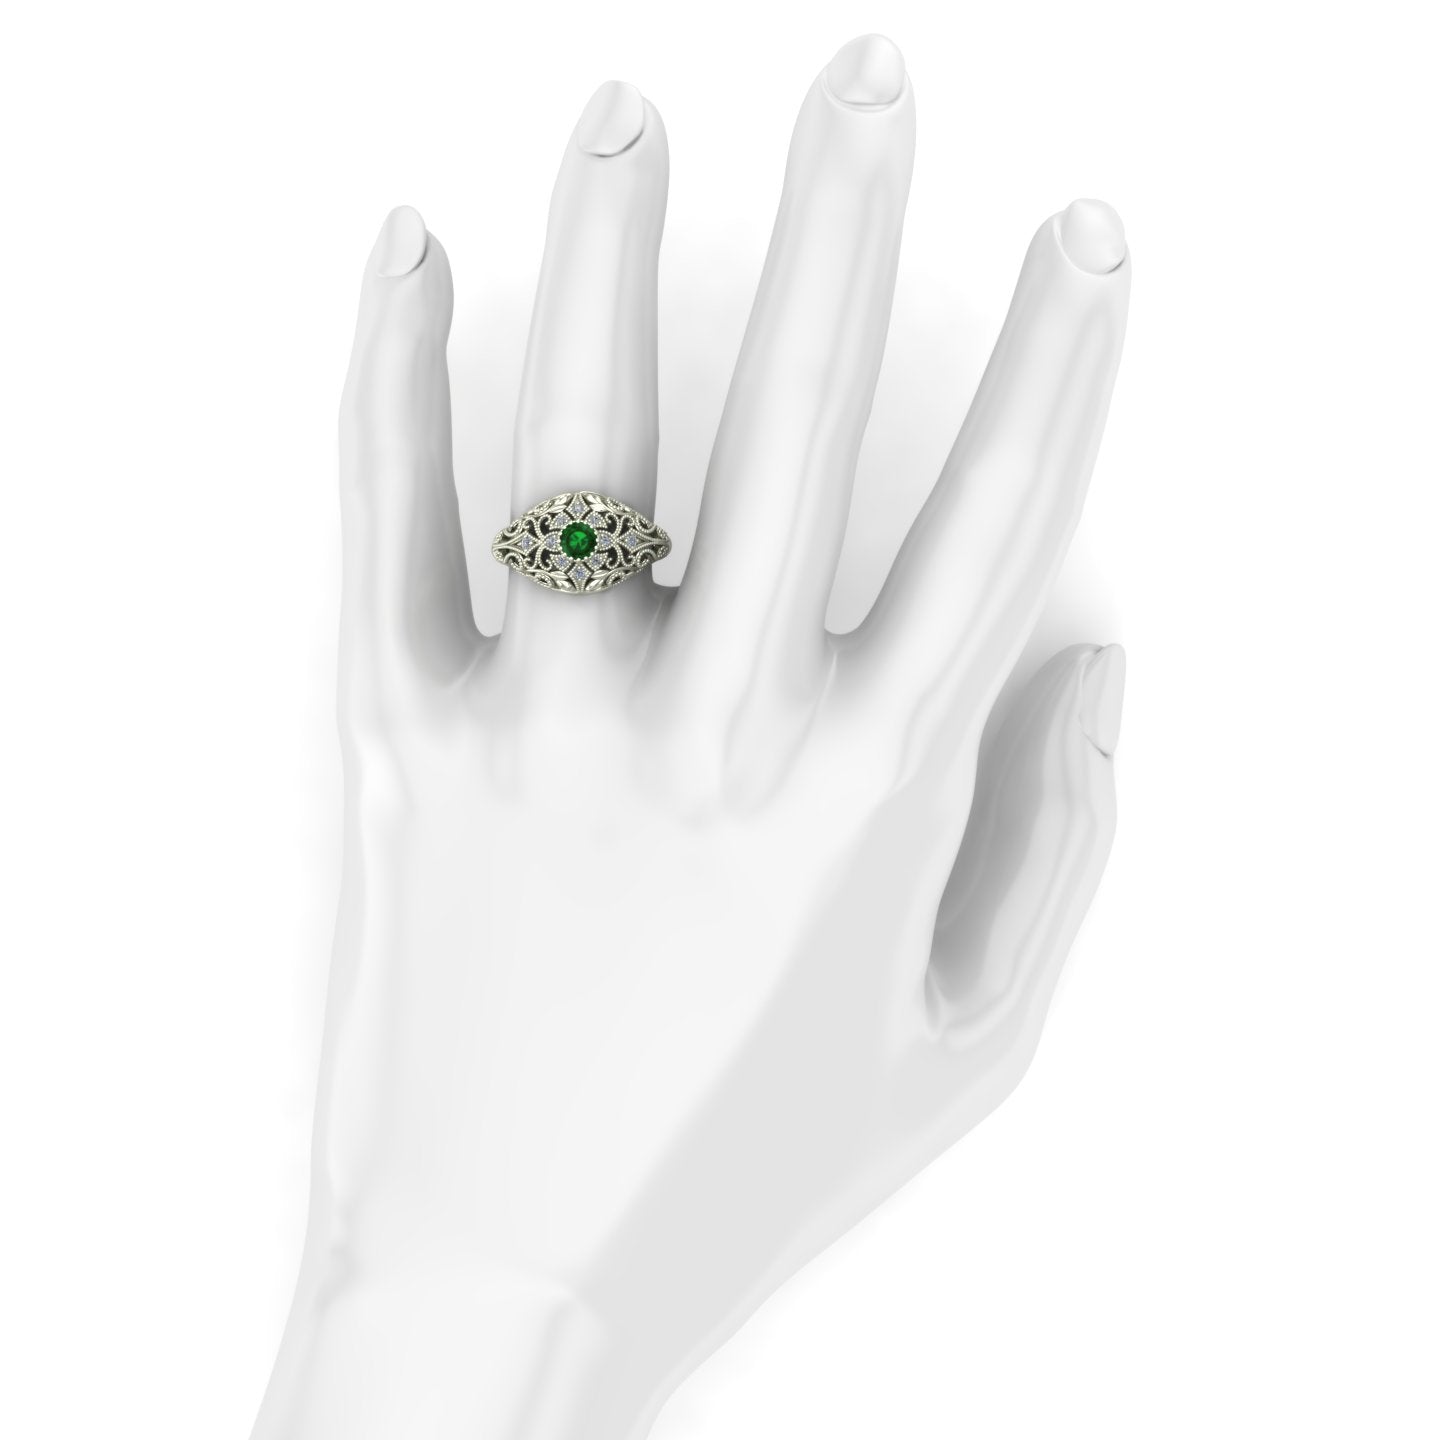 Emerald and diamond dome ring with leaves and vines in 14k white gold - Charles Babb Designs - on hand